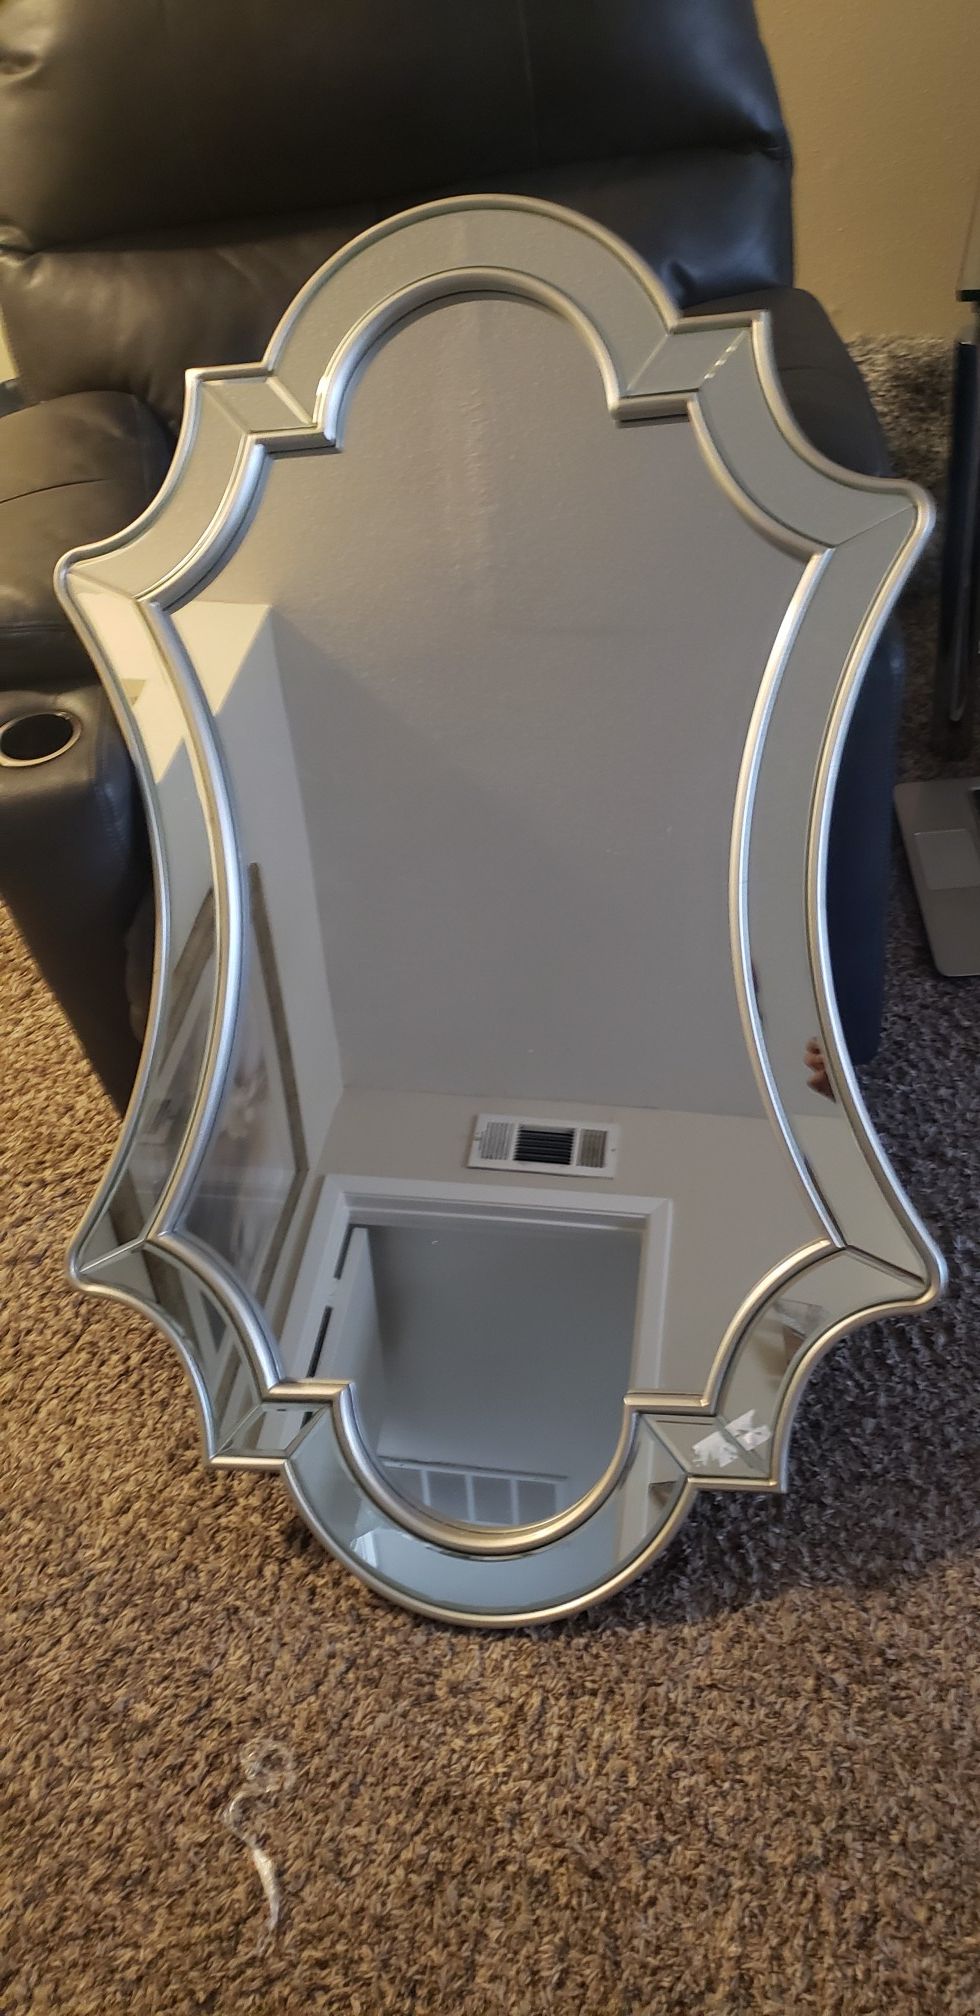 Decorative mirror for wall hanging. 4 feet tall